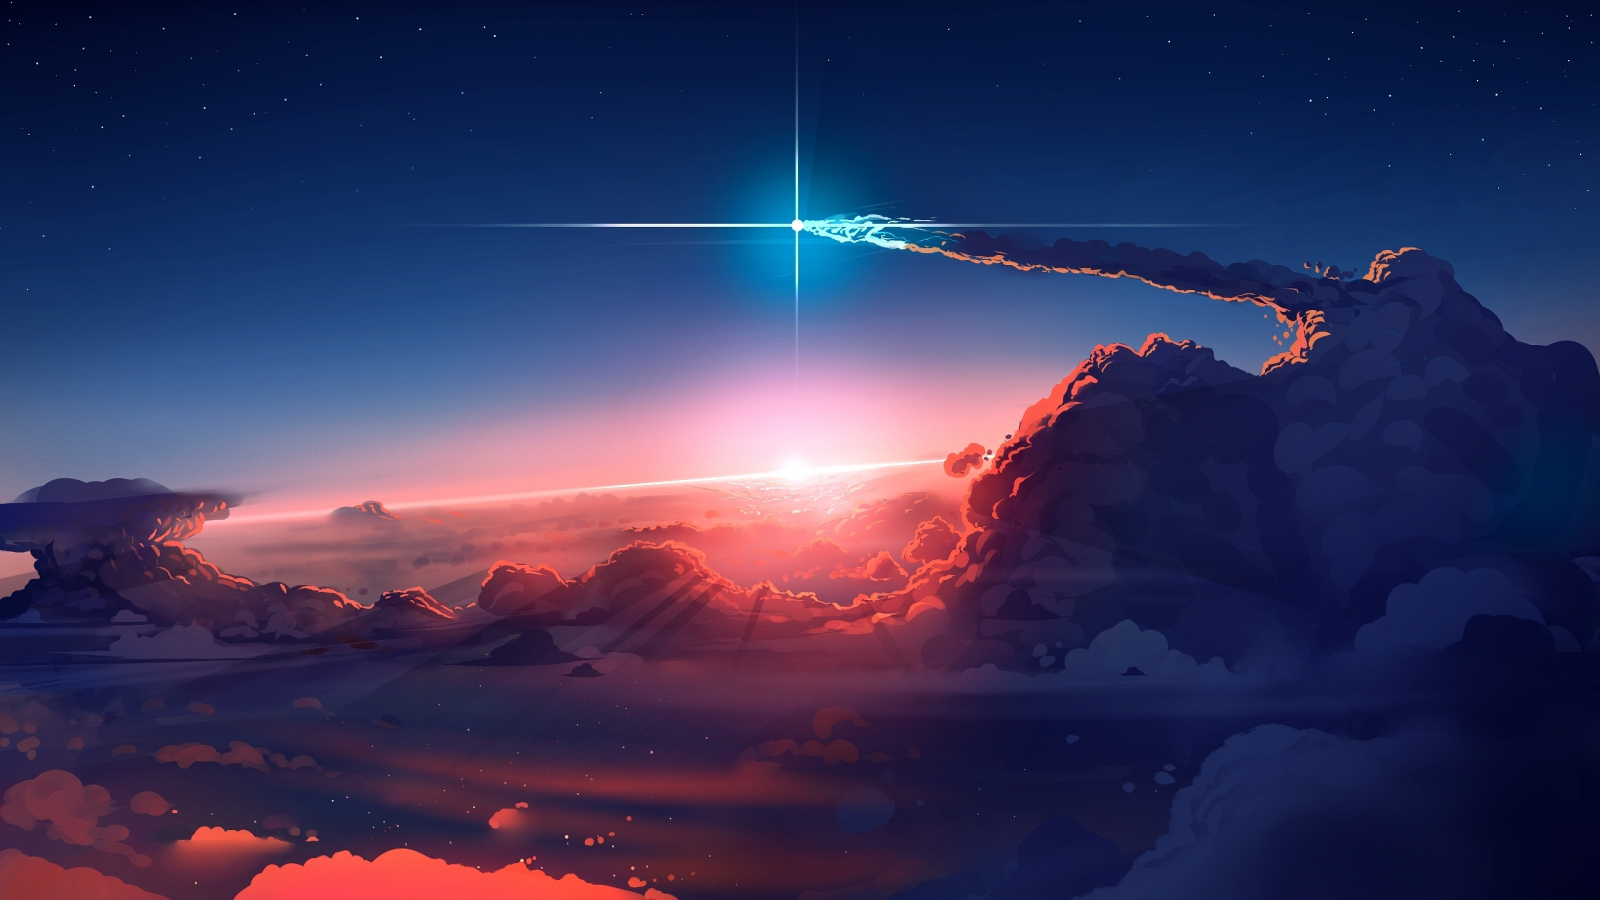 Incredible Sky wallpaper 16 9 for your widescreen monitor